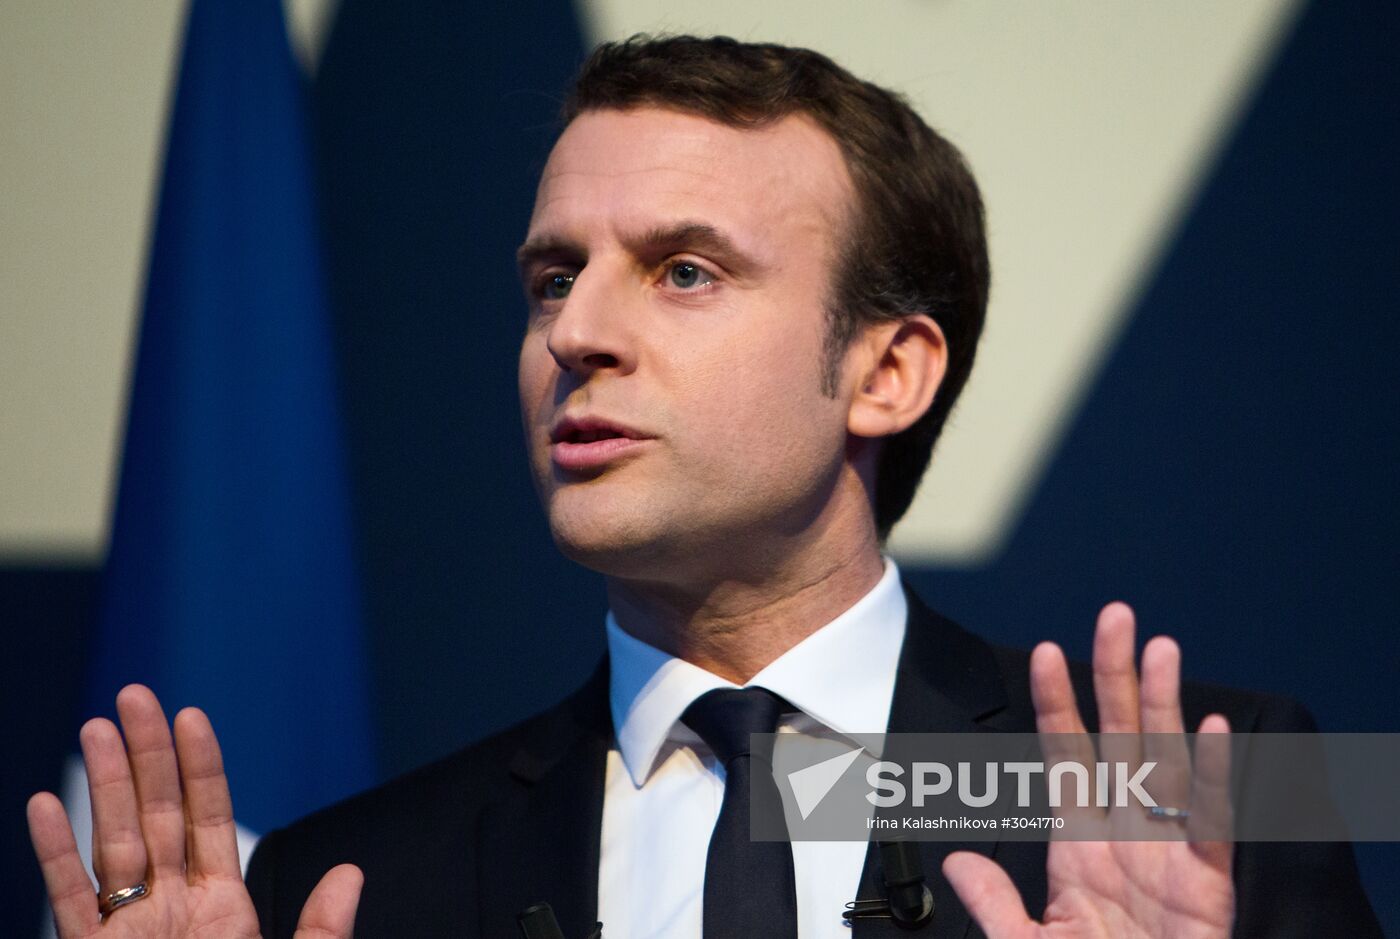 French presidential candidate Emmanuel Macron presents his program